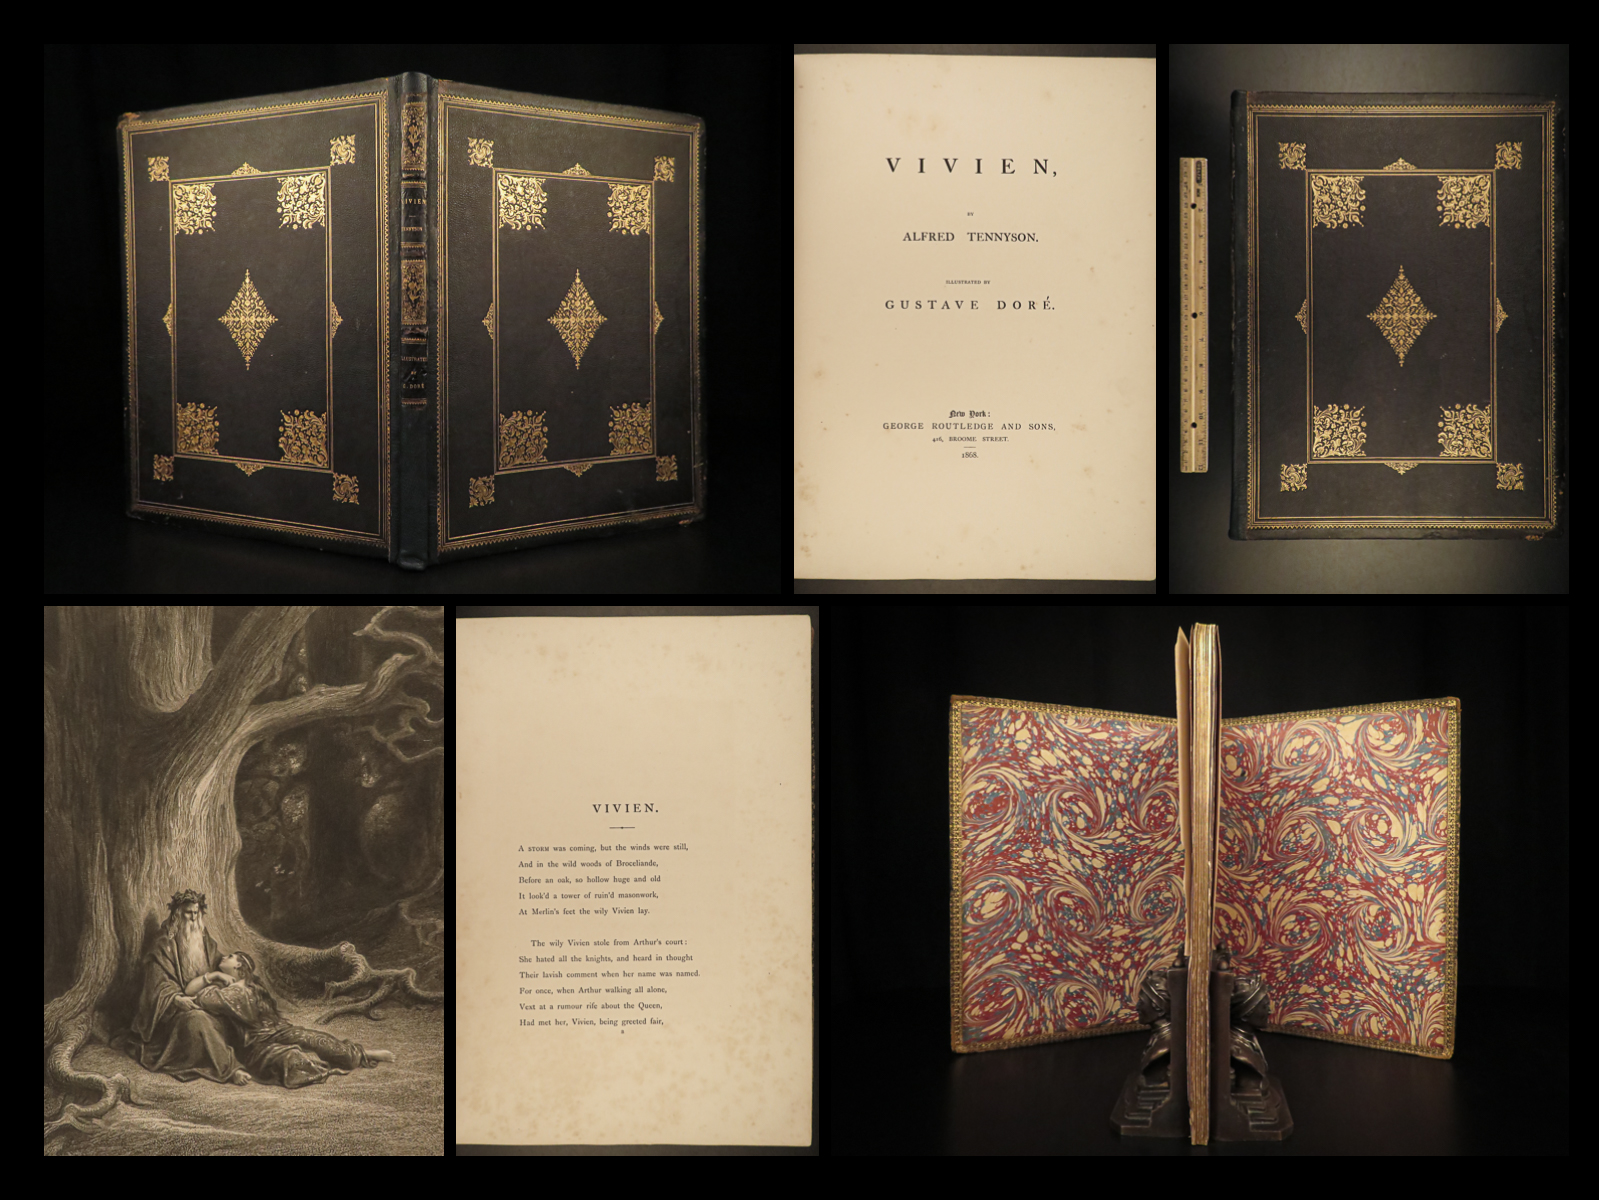 1868 EXQUISITE Vivien Alfred Tennyson Gustave Dore Idylls of the King ...